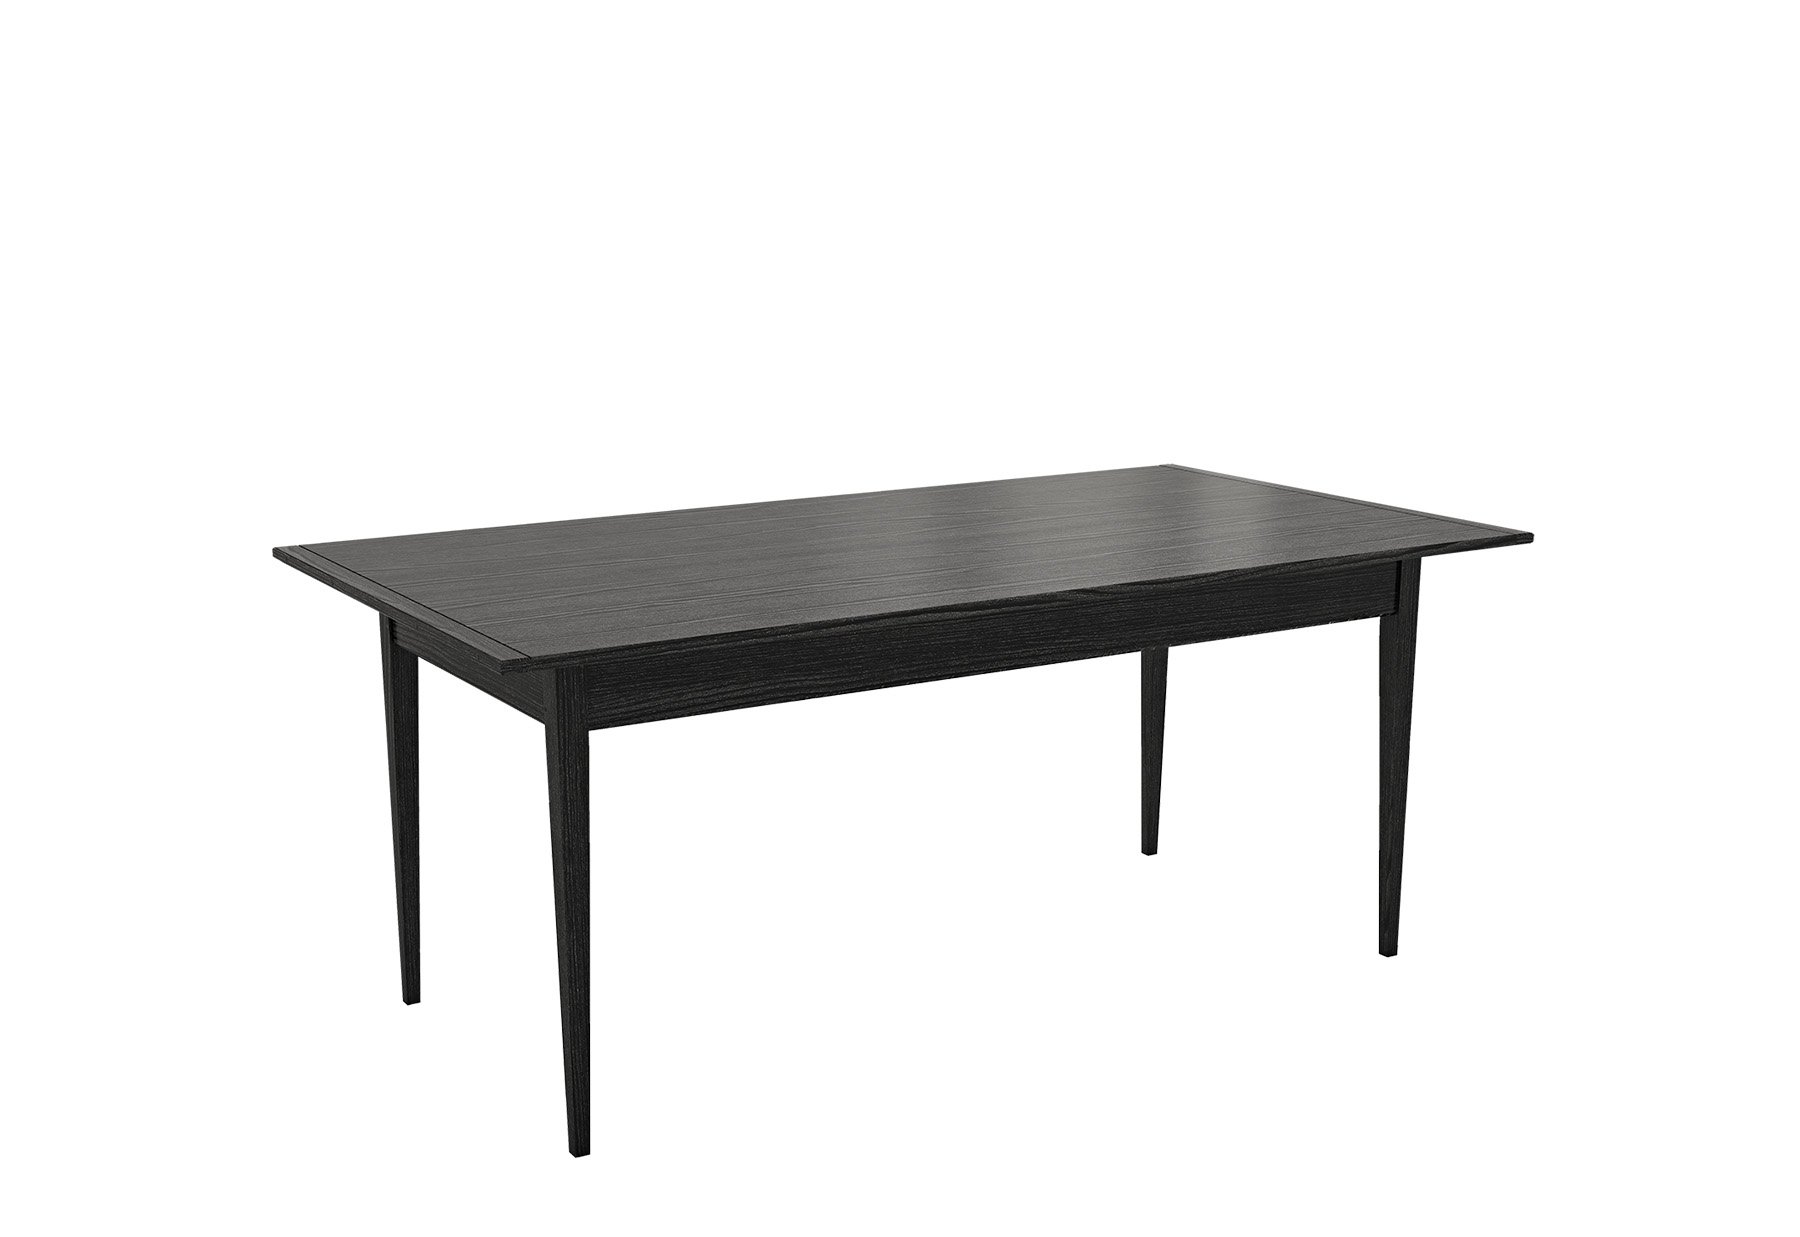 HARVEST DINING TABLE - 72" X 38" - $4,940